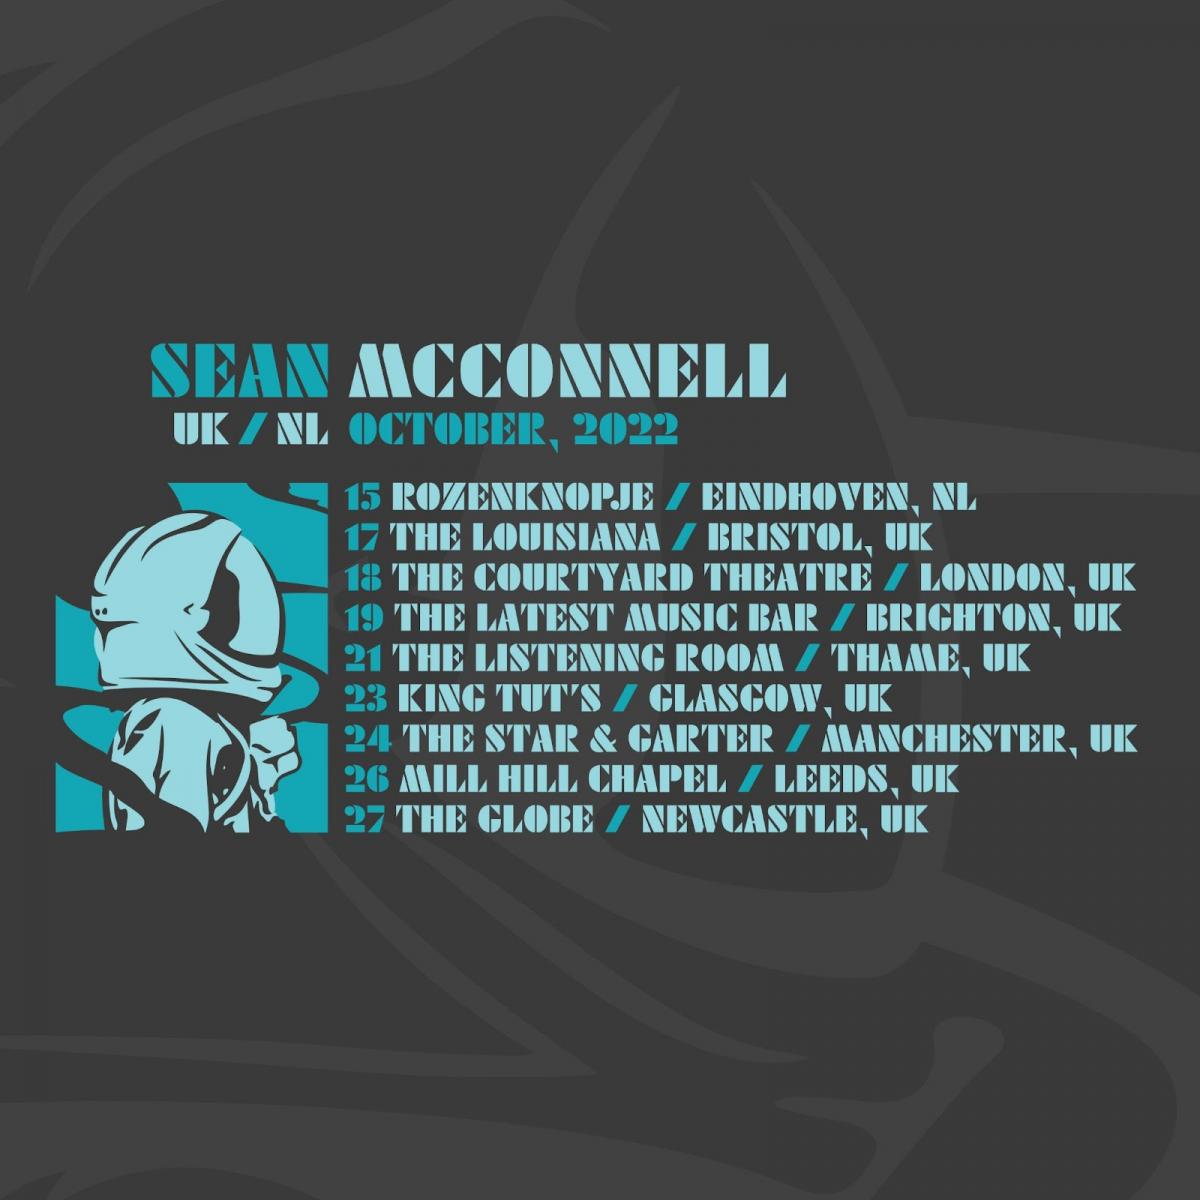 Sean McConnell announces rescheduled 2022 European dates starting this October